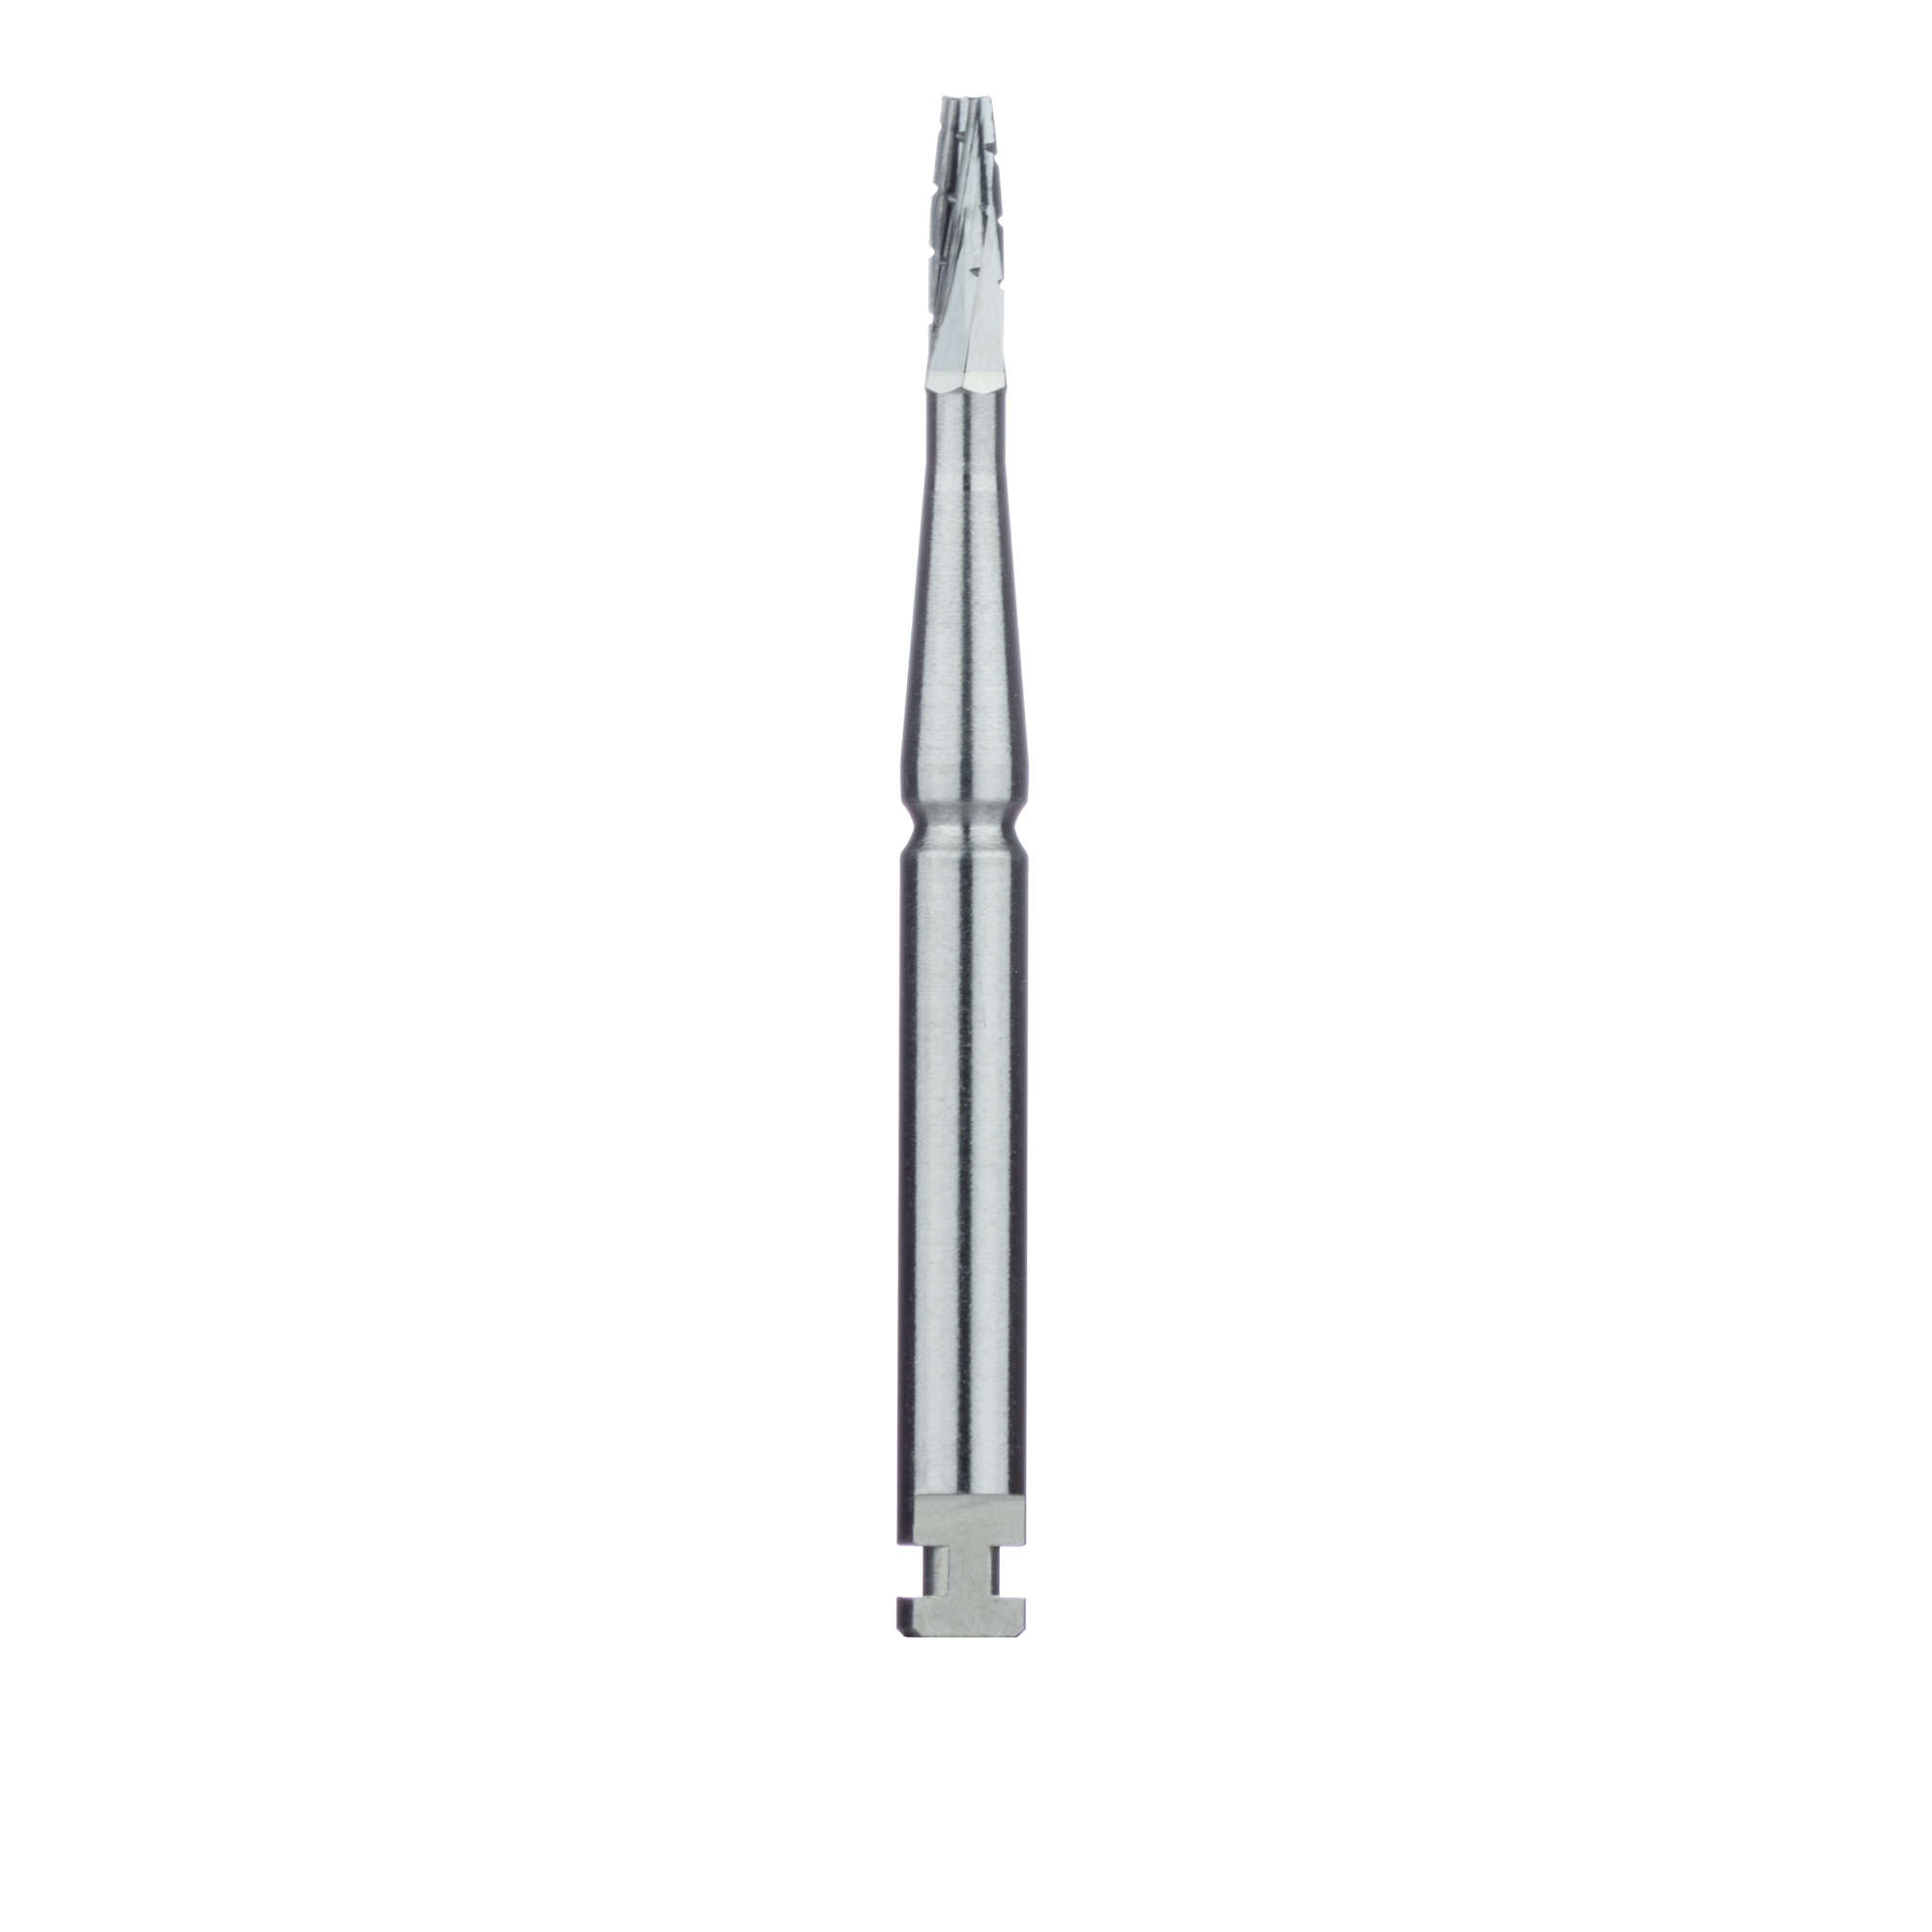 HM33T-016-RAL Operative Carbide Bur, Tapered Fissure, 1.6mm, RAL